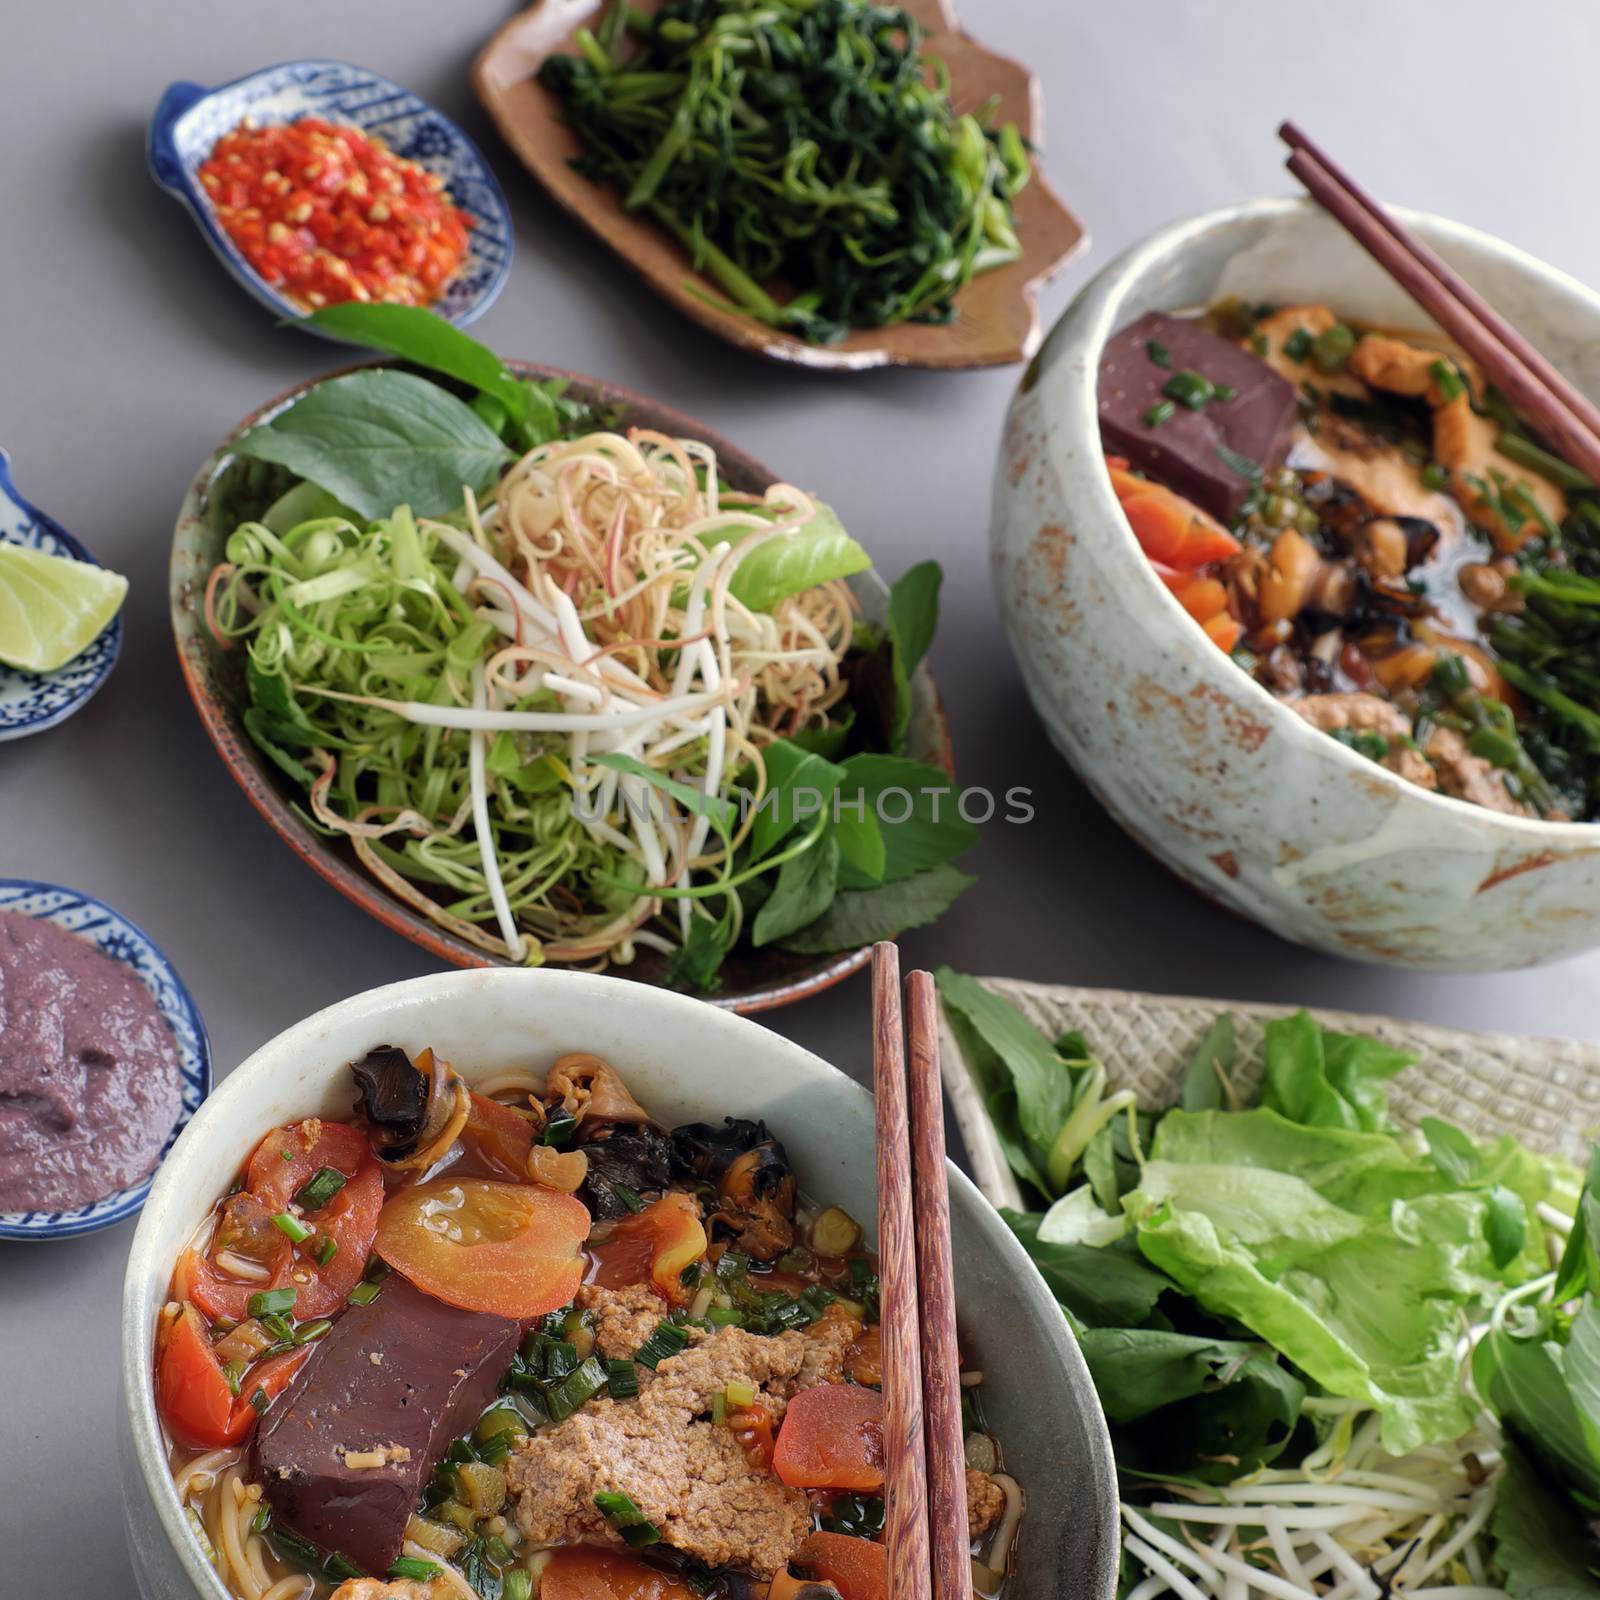 Vietnamese food, bun rieu and canh bun, is popular street food cook from crab, tofu, vermicelli eat with shrimp paste, vegetables, is delicious and cheap dish